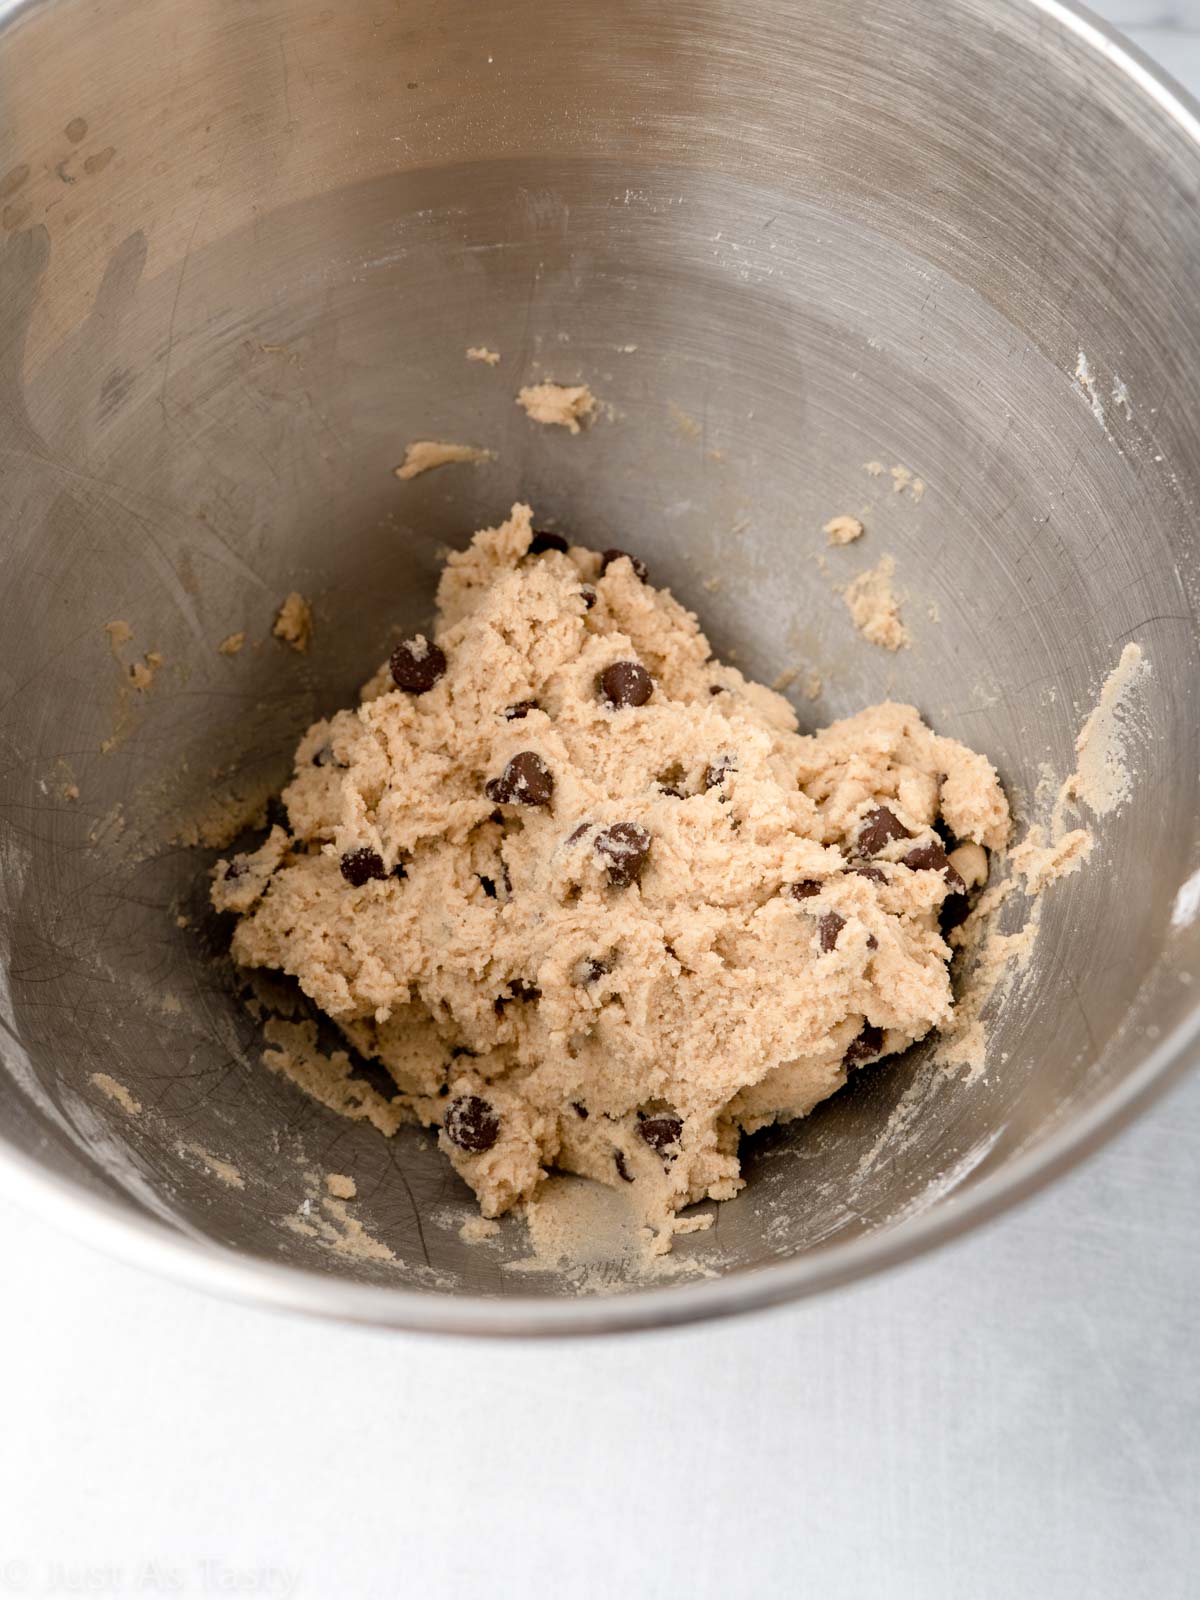 Chocolate chip cookie dough in a bowl.